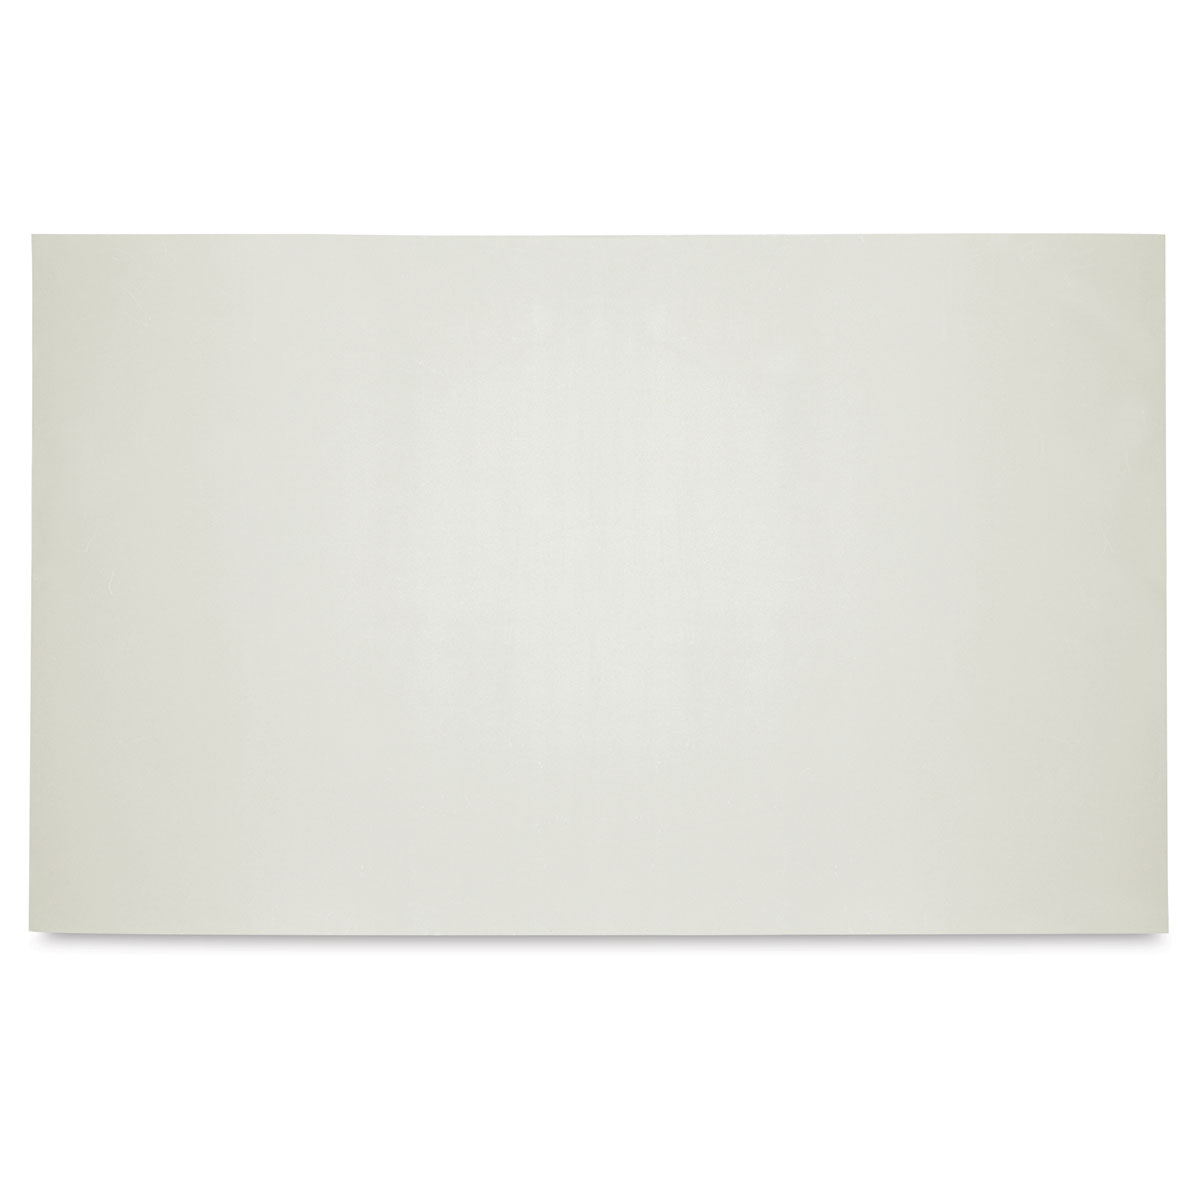 Thibra Thermoplastic Sheet - 13.38IN X 21.65IN 